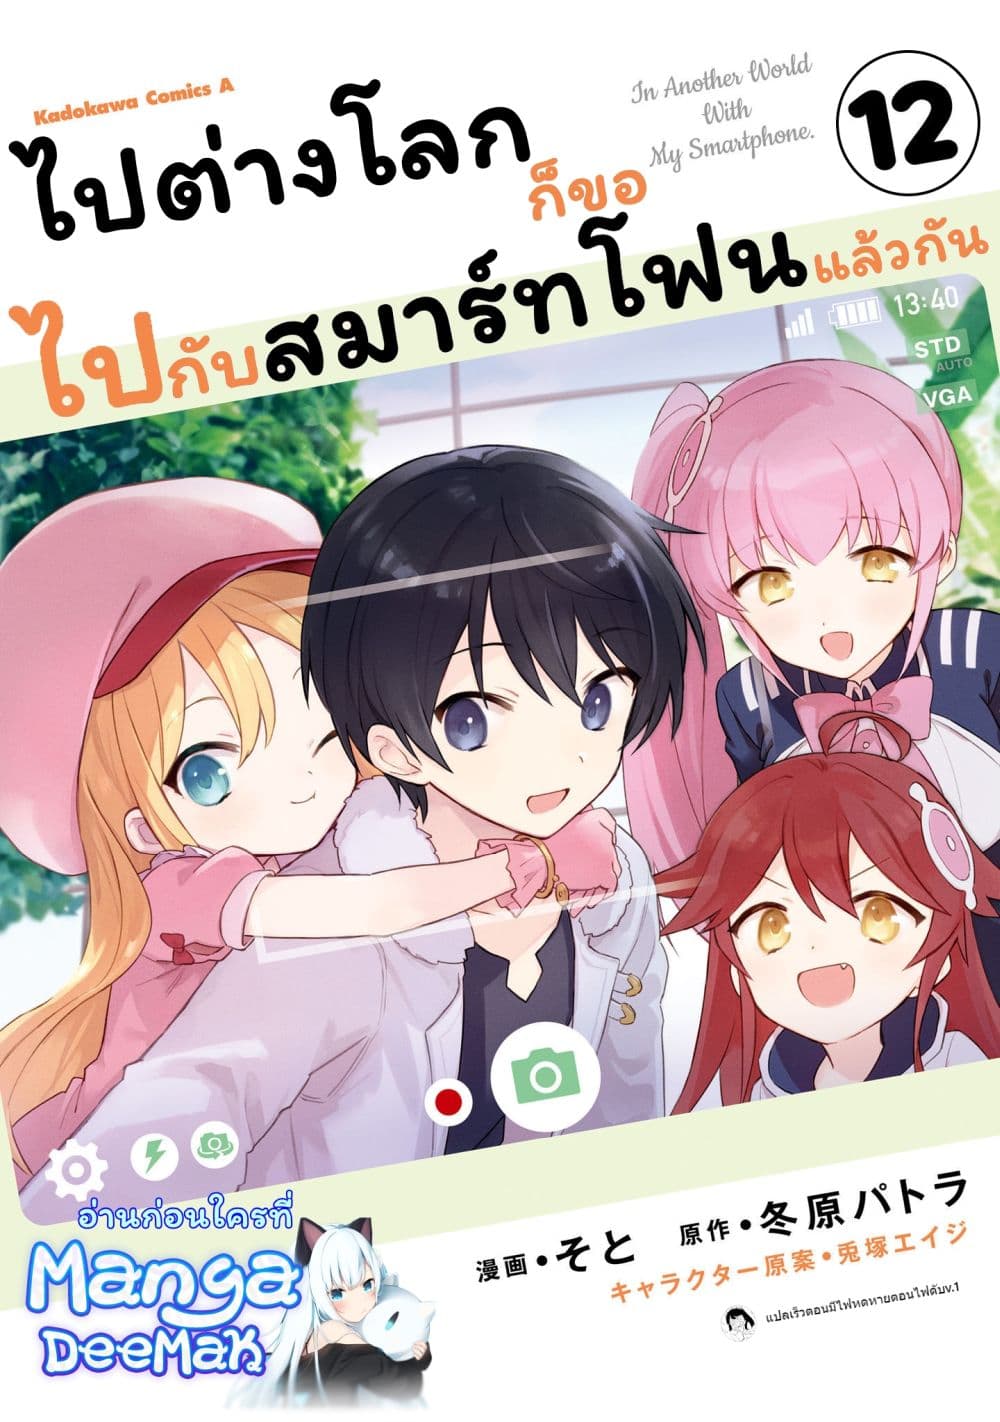 In Another World With My Smartphone ตอนที่ 64.1 (1)